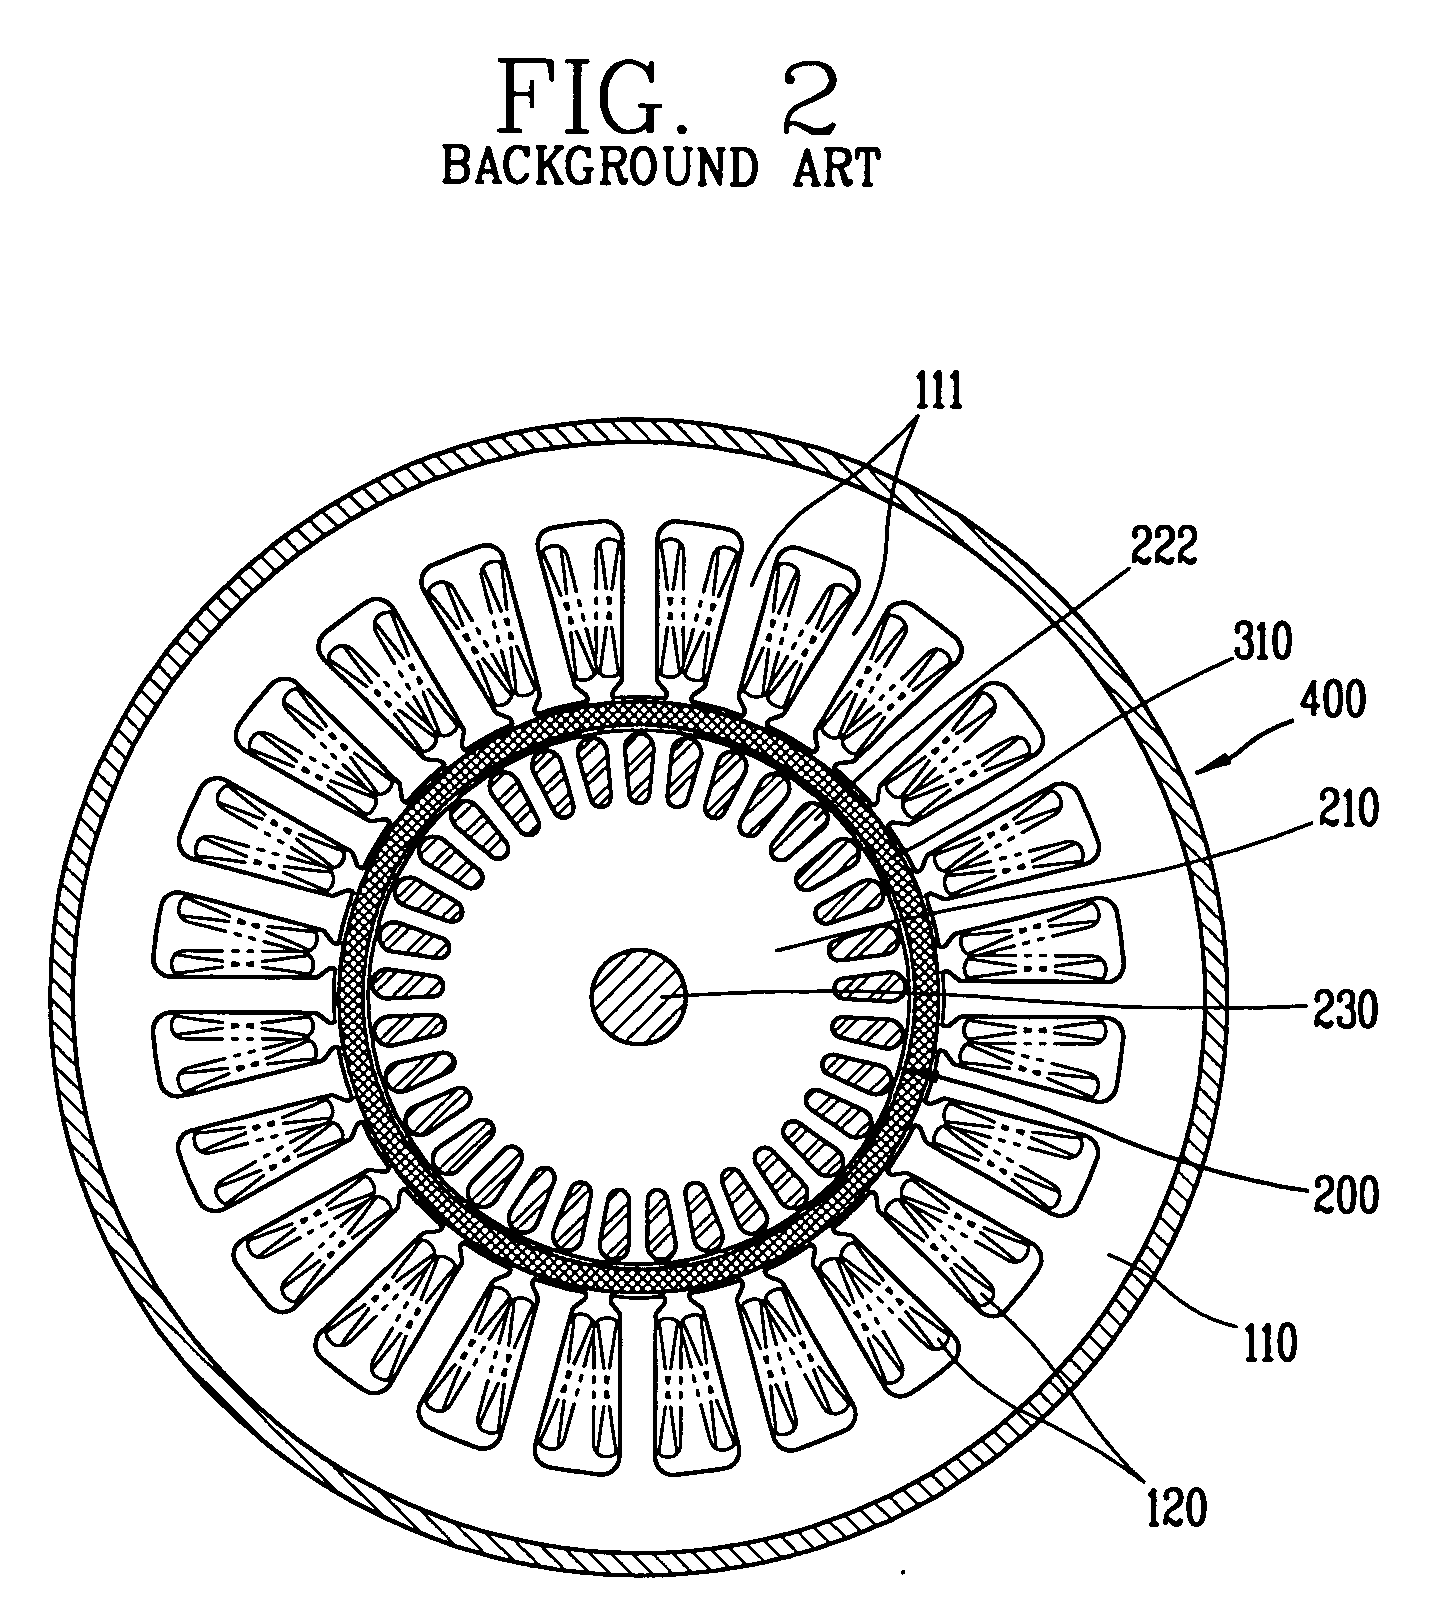 Induction motor having reverse-rotation preventing function